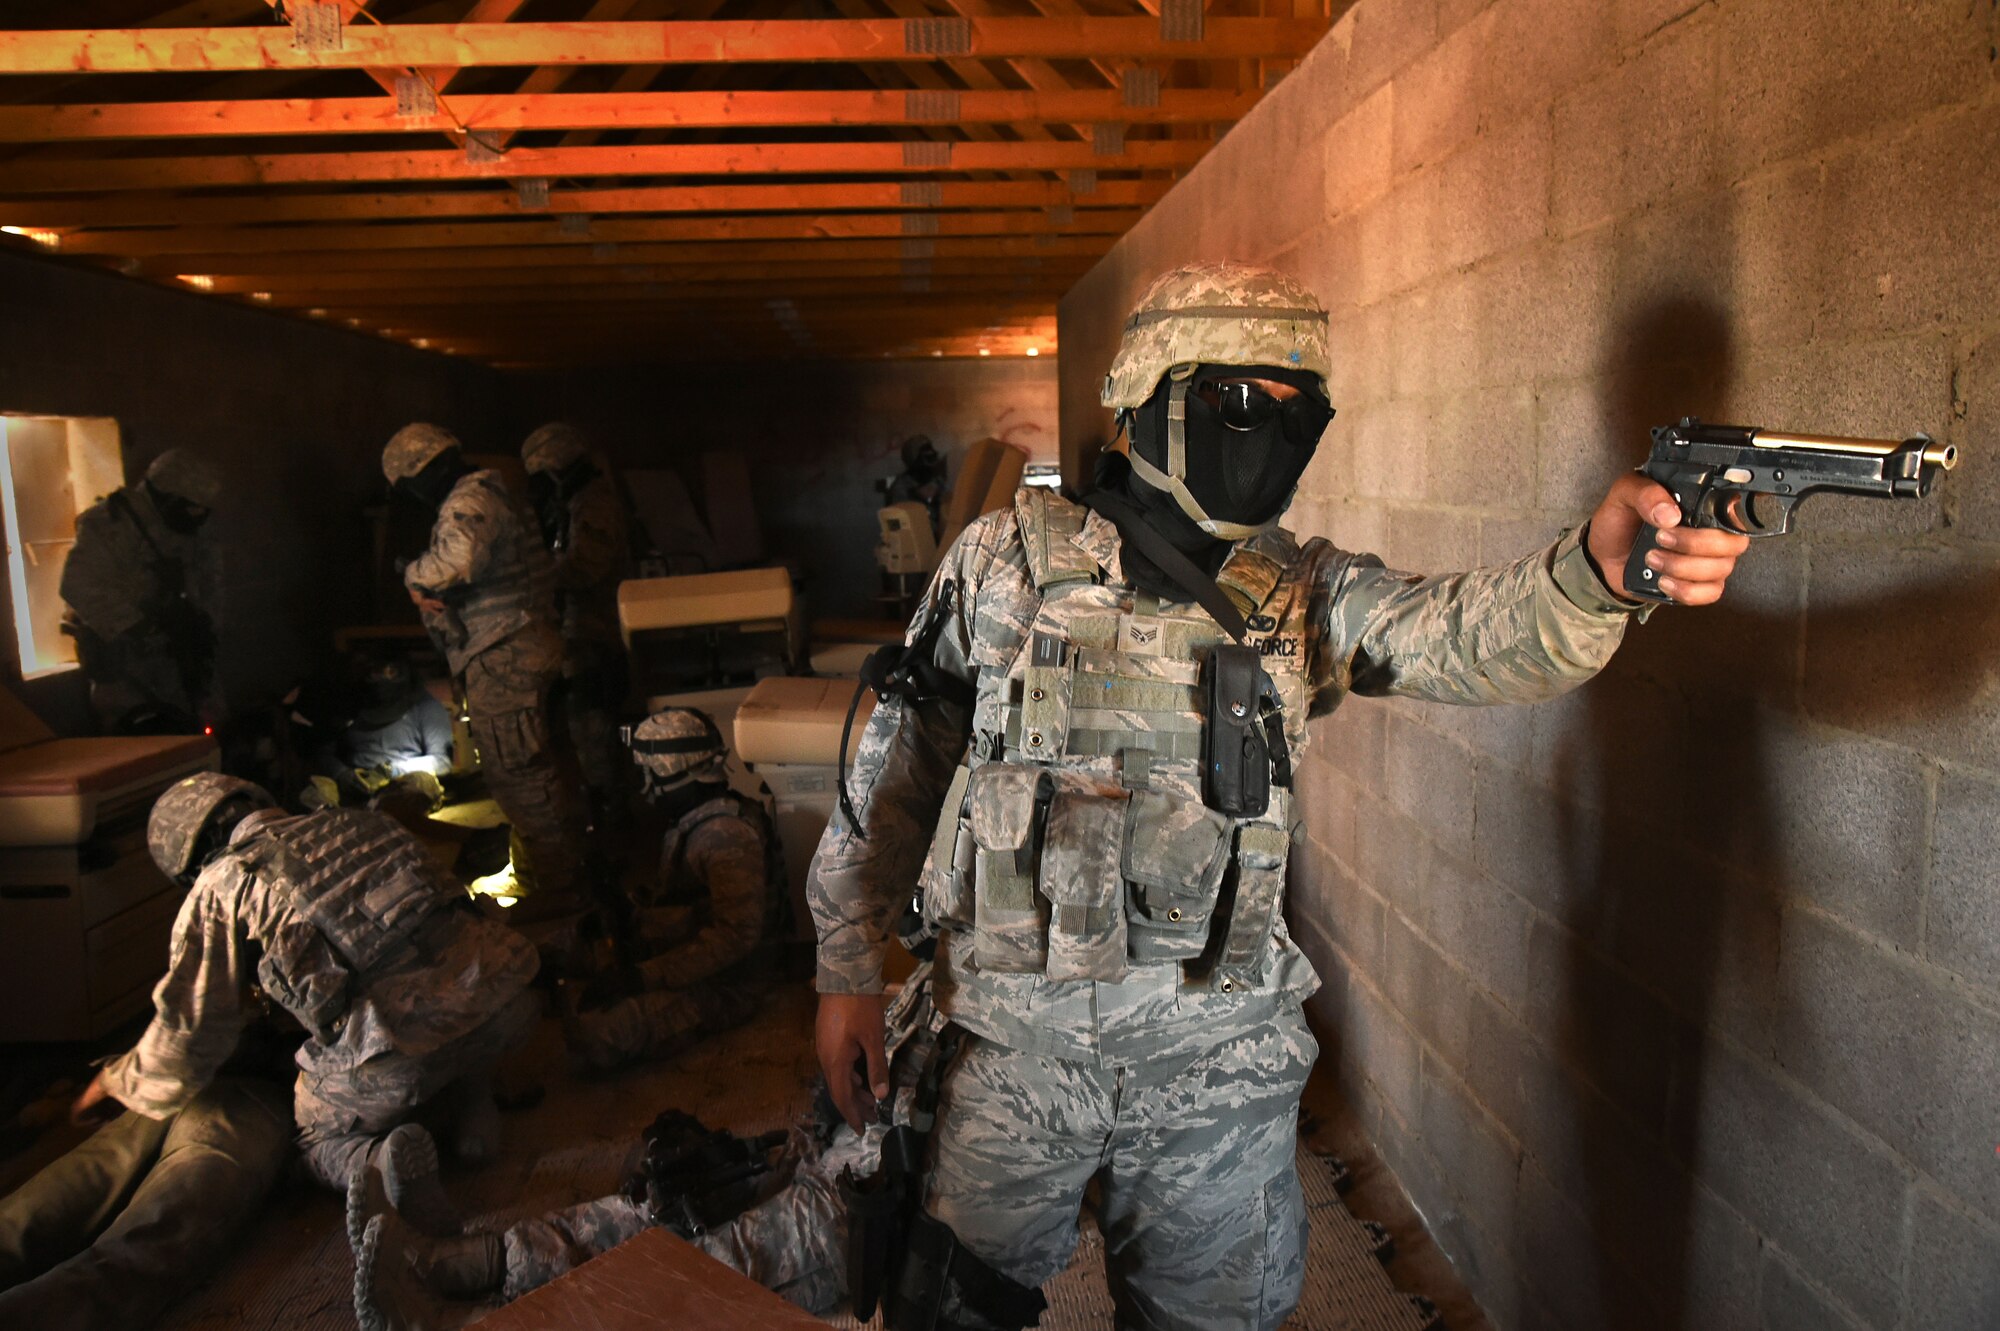 An Airman assigned to the 799th Security Forces Squadron defends his unit’s position from opposing forces during the field training exercise of a Fundamentals of Proficiency Fire and Close Quarters Battle course, Oct. 21, 2016, at Range 63C, Silver Flag Alpha, Nev. Airmen were tested and evaluated in combat tactics, strategic planning, communication and leadership through various training scenarios. (U.S. Air Force photo by Airman 1st Class James Thompson) 